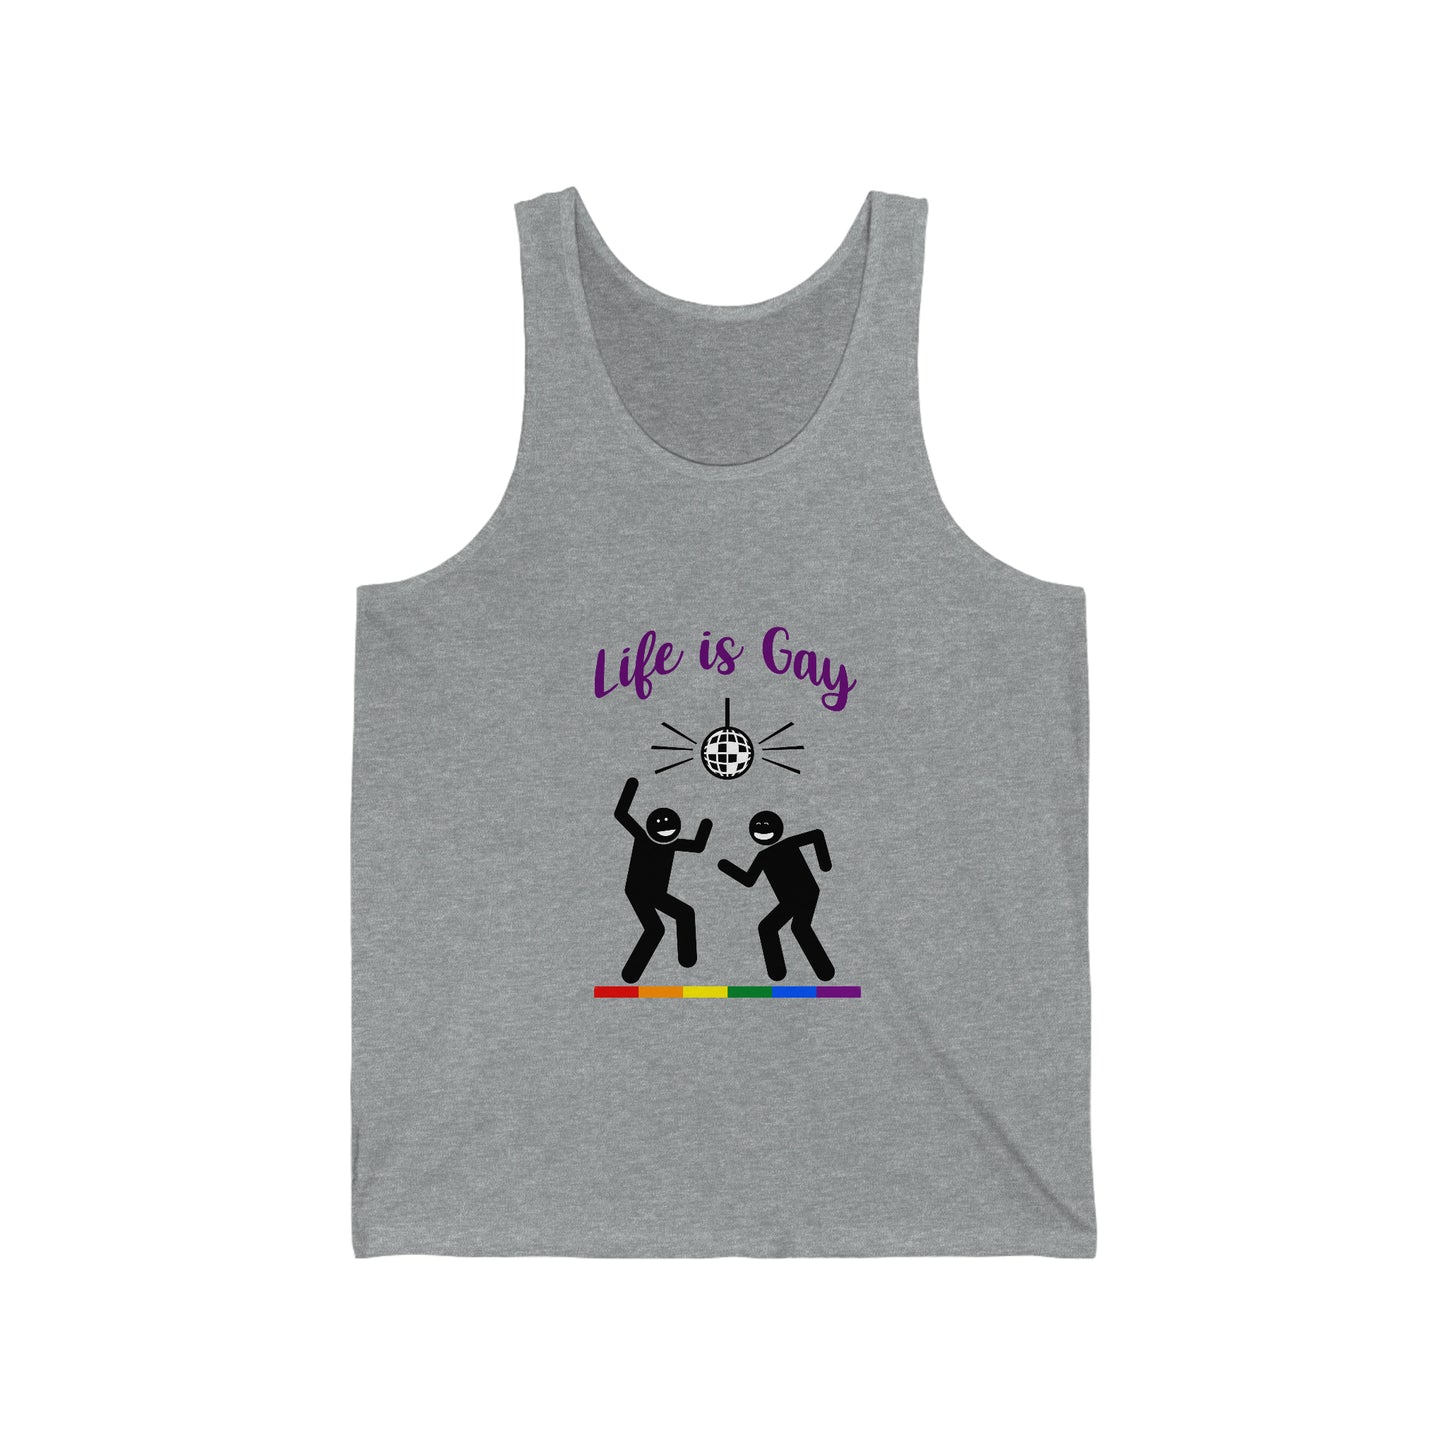 Life Is Gay - Disco Adult Unisex Tank Top